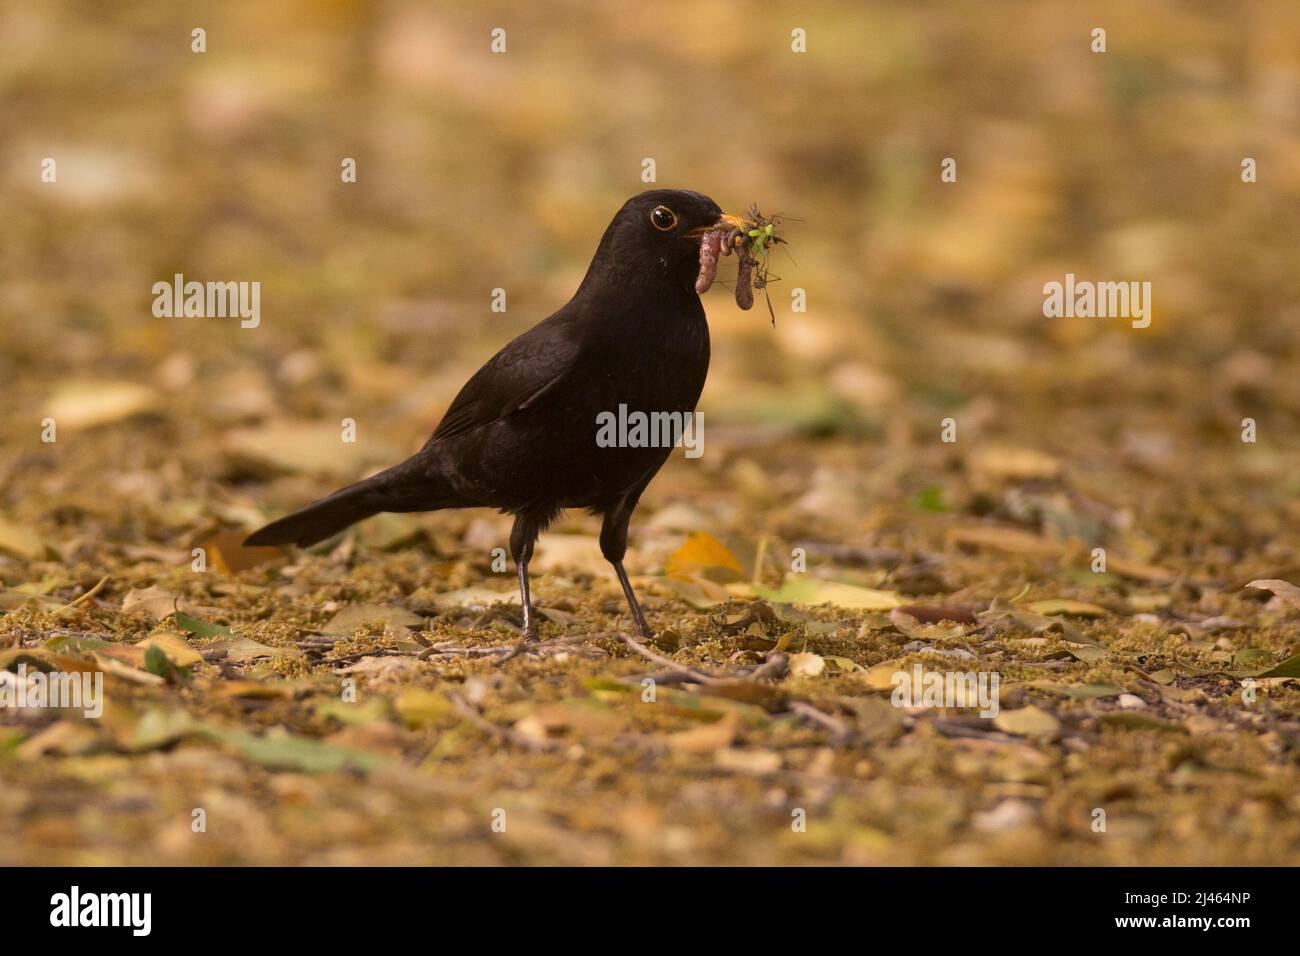 Male Common Blackbird or Eurasian Blackbird (Turdus merula) This bird is found throughout Europe and the near east and feeds on a variety of foods, in Stock Photo